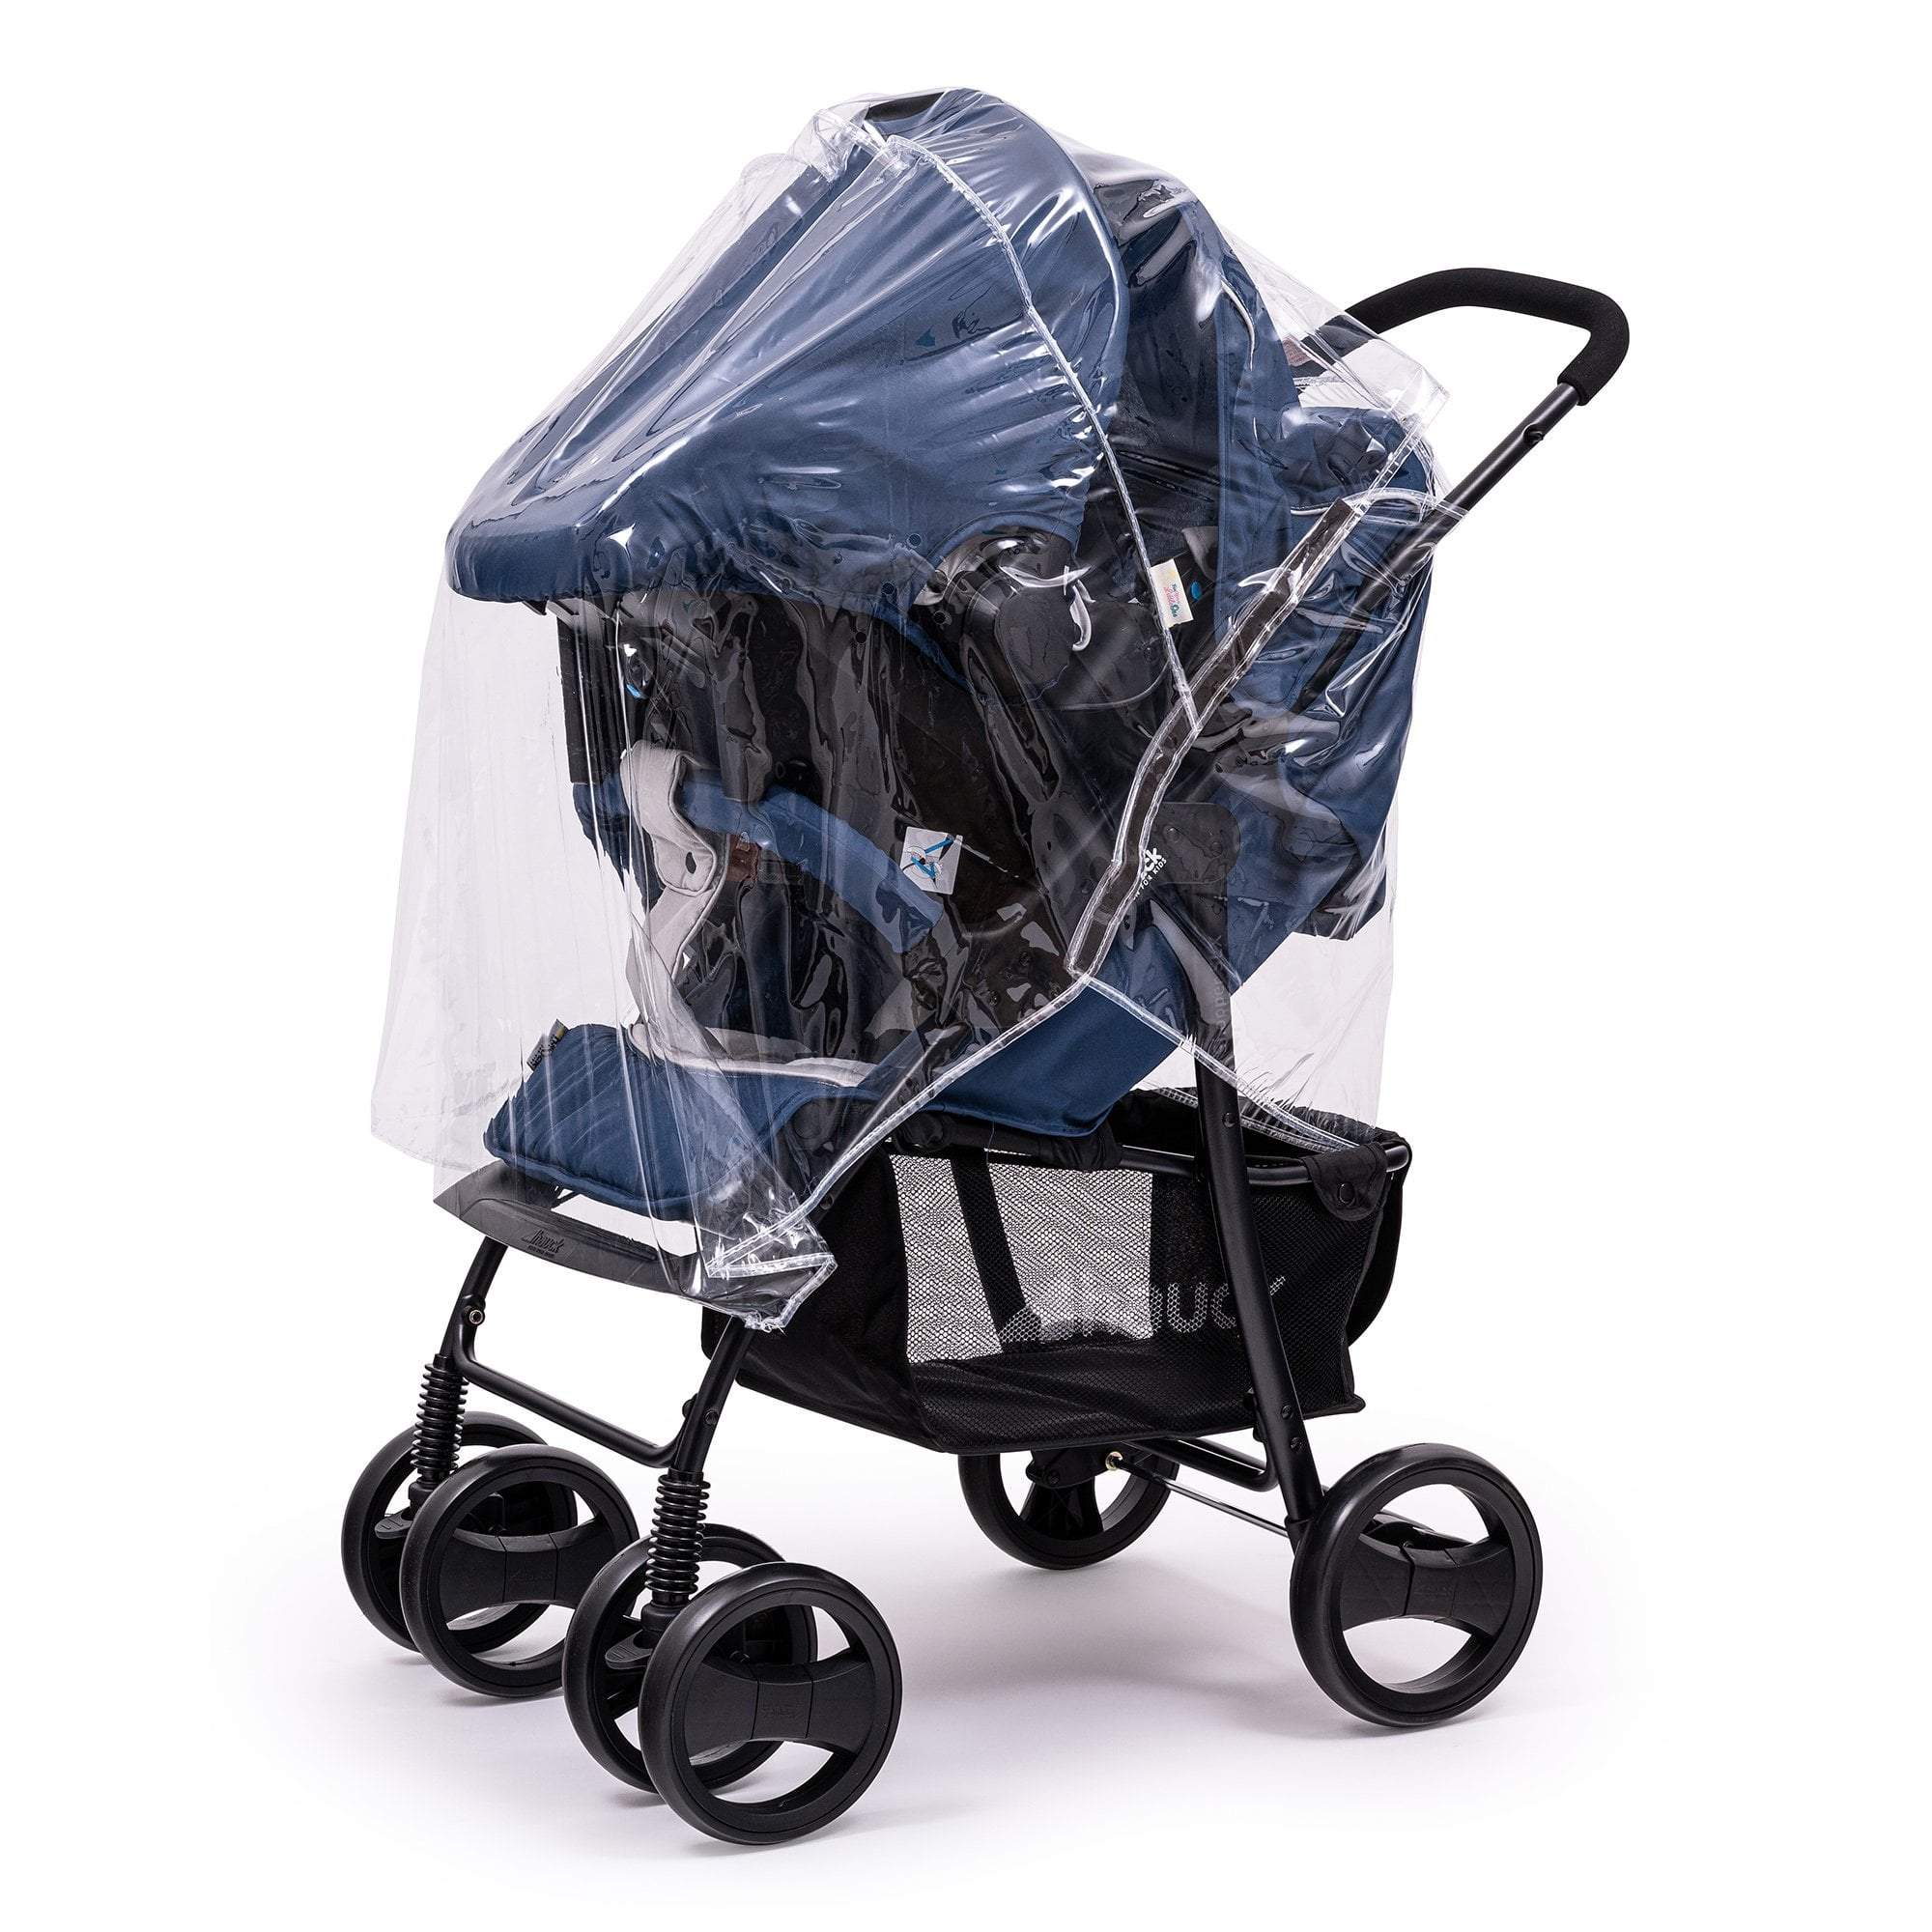 Travel System Raincover Compatible with BeSafe - Fits All Models - For Your Little One